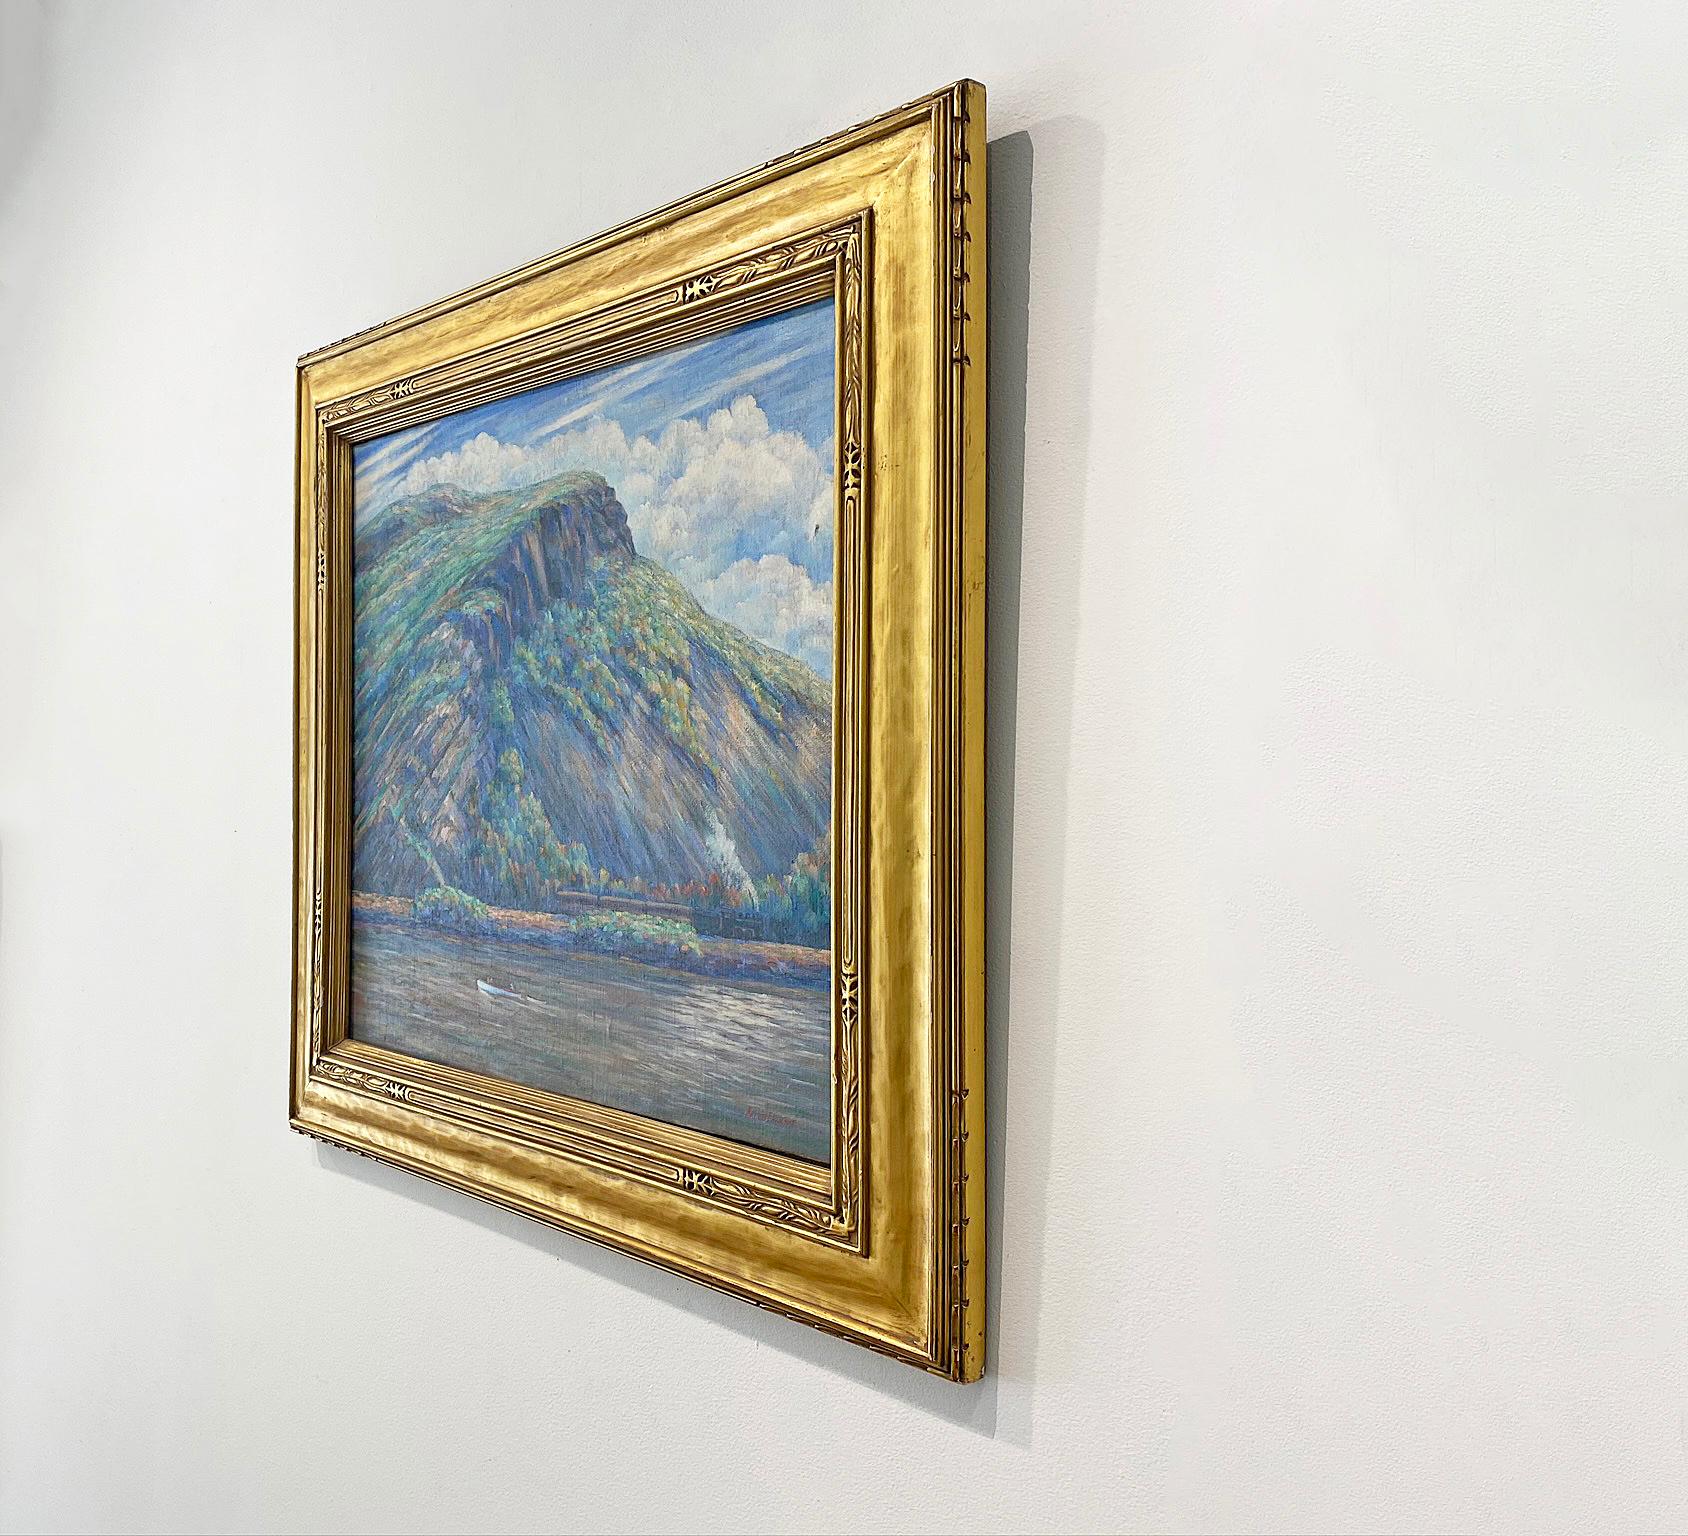 'Crows-Nest Mountain' in 1931 by New York City artist Arthur Frischke. Oil on canvas, 22 x 26 in. / Frame 30 x 32.25 in. This landscape view features Crows-Nest Mountain, located in Highlands, NY along the Hudson River. This painting features pastel